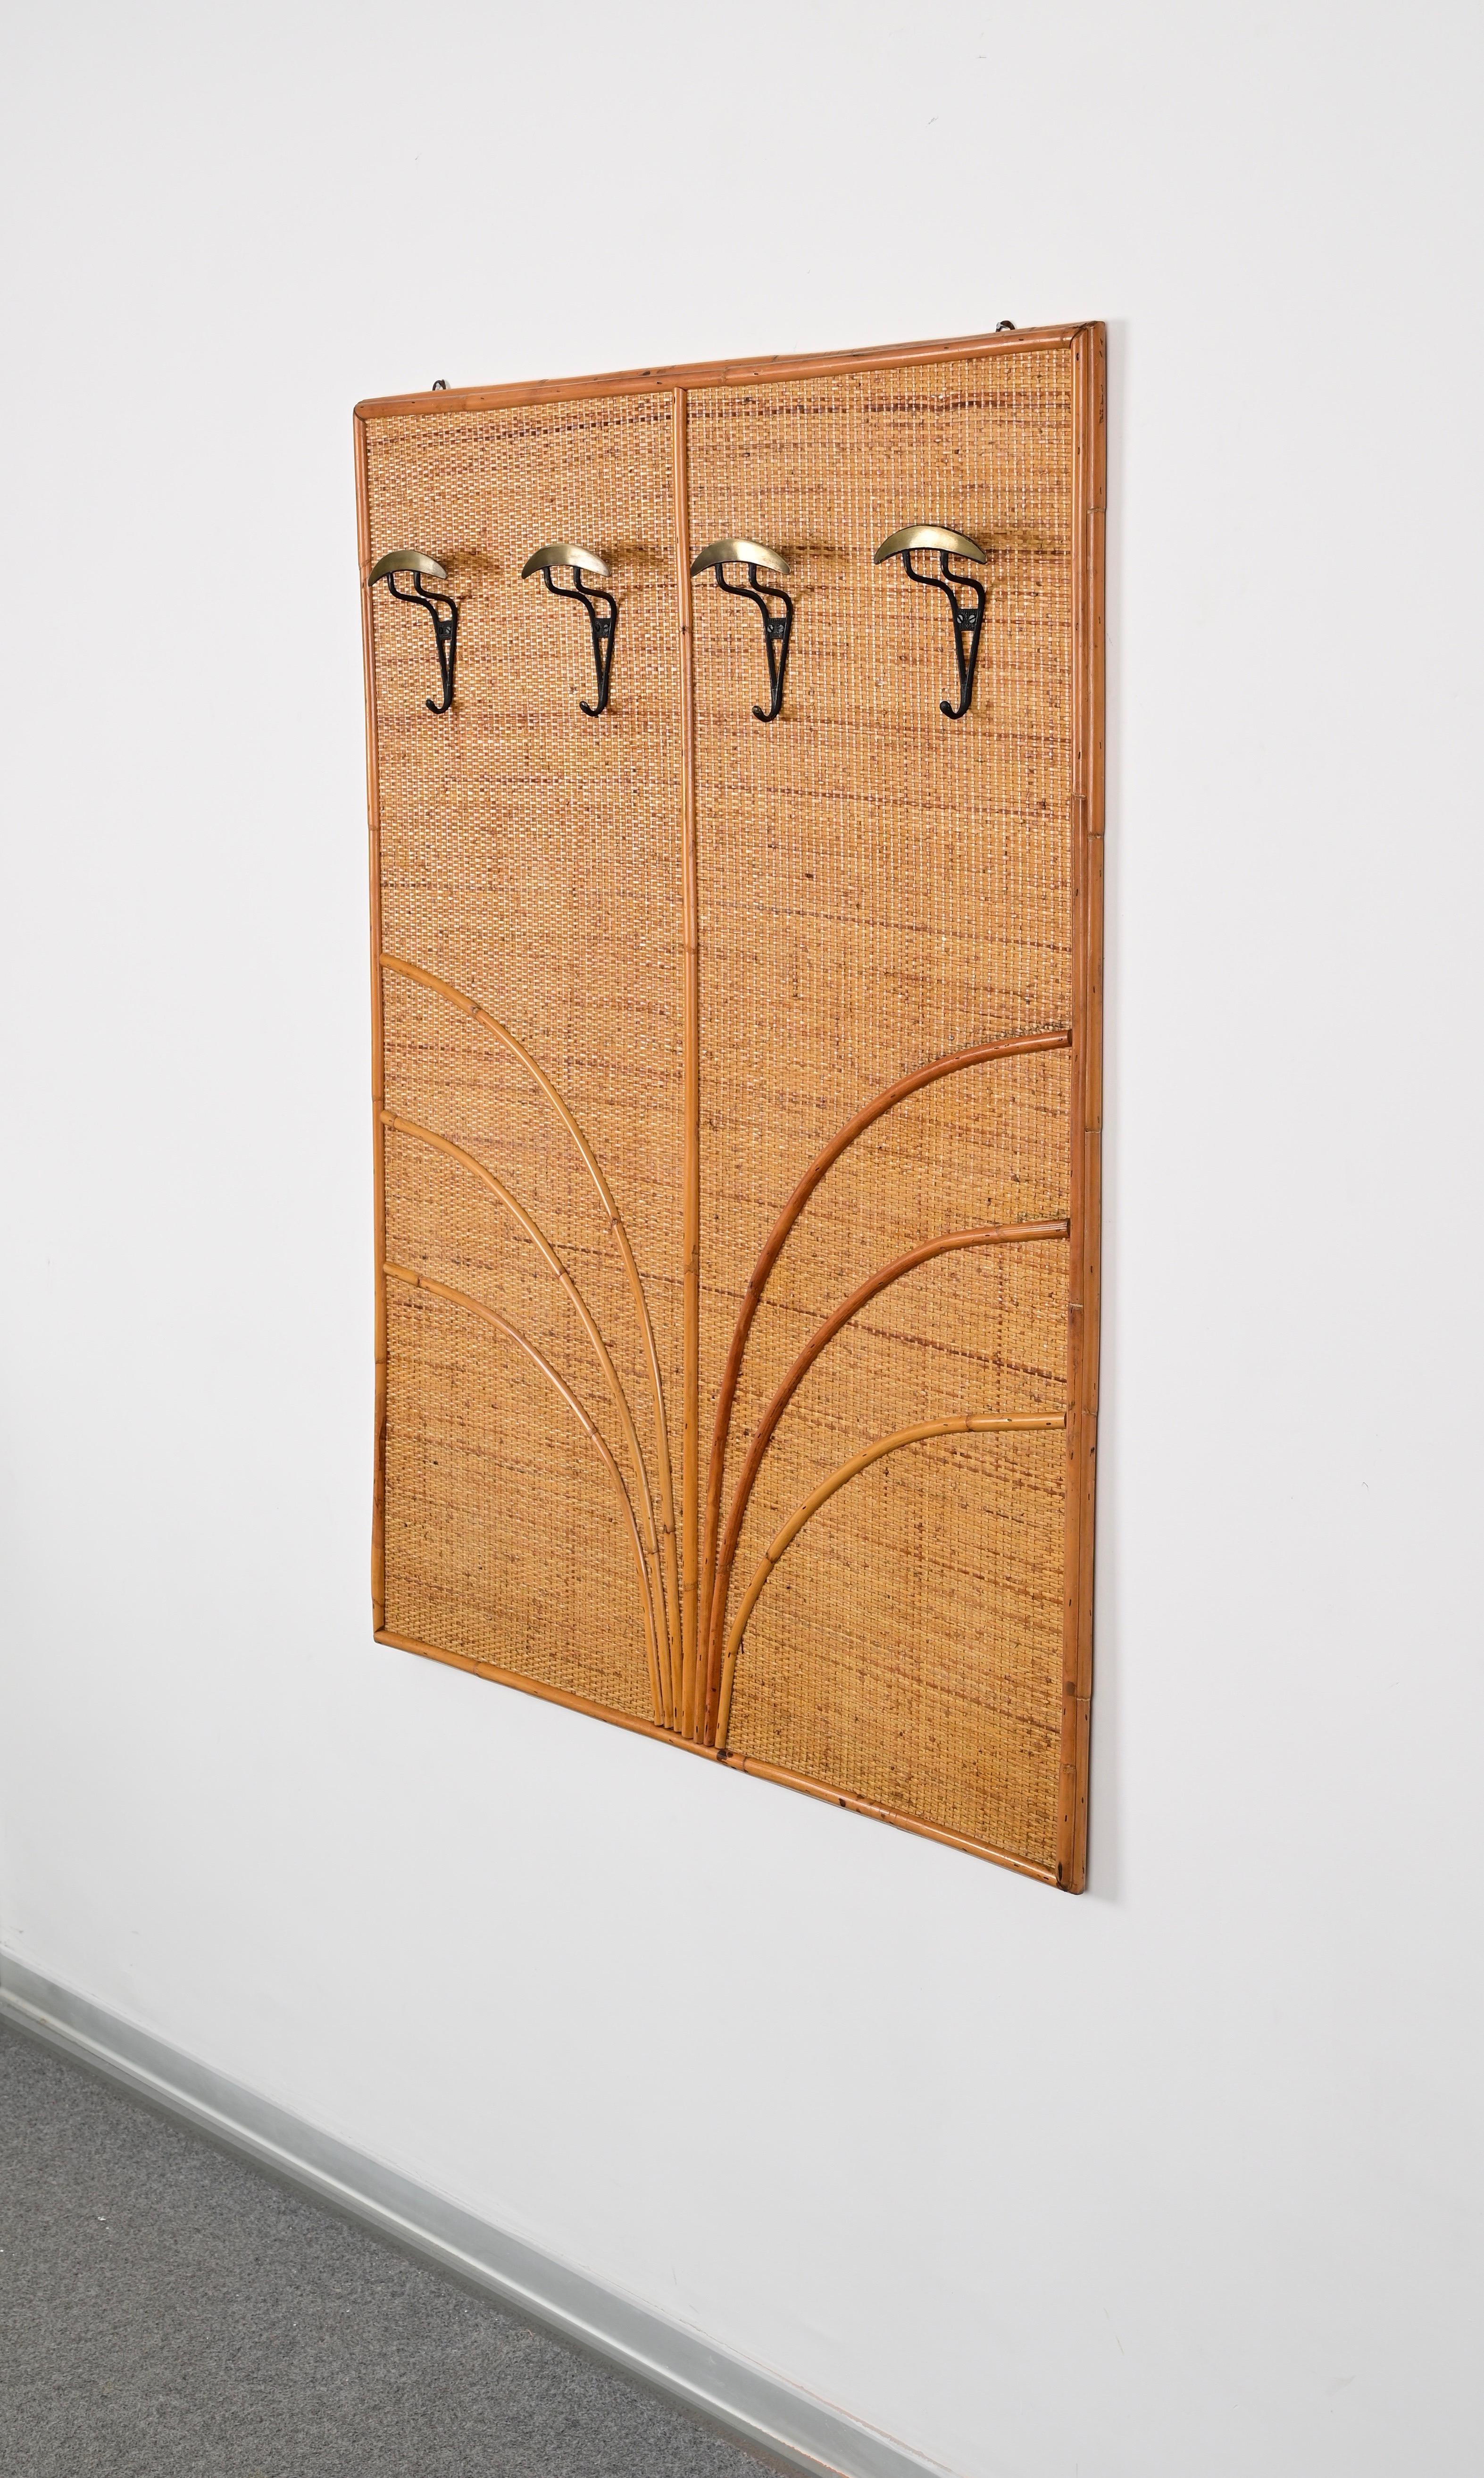 Gorgeous midcentury coat rack in bamboo and woven rattan wicker with solid brass coat hooks. This incredibl elegant piece was made by Vivai del Sud in Italy during the 1970s. 

This iconic French Riviera style coat rack features a rectangular